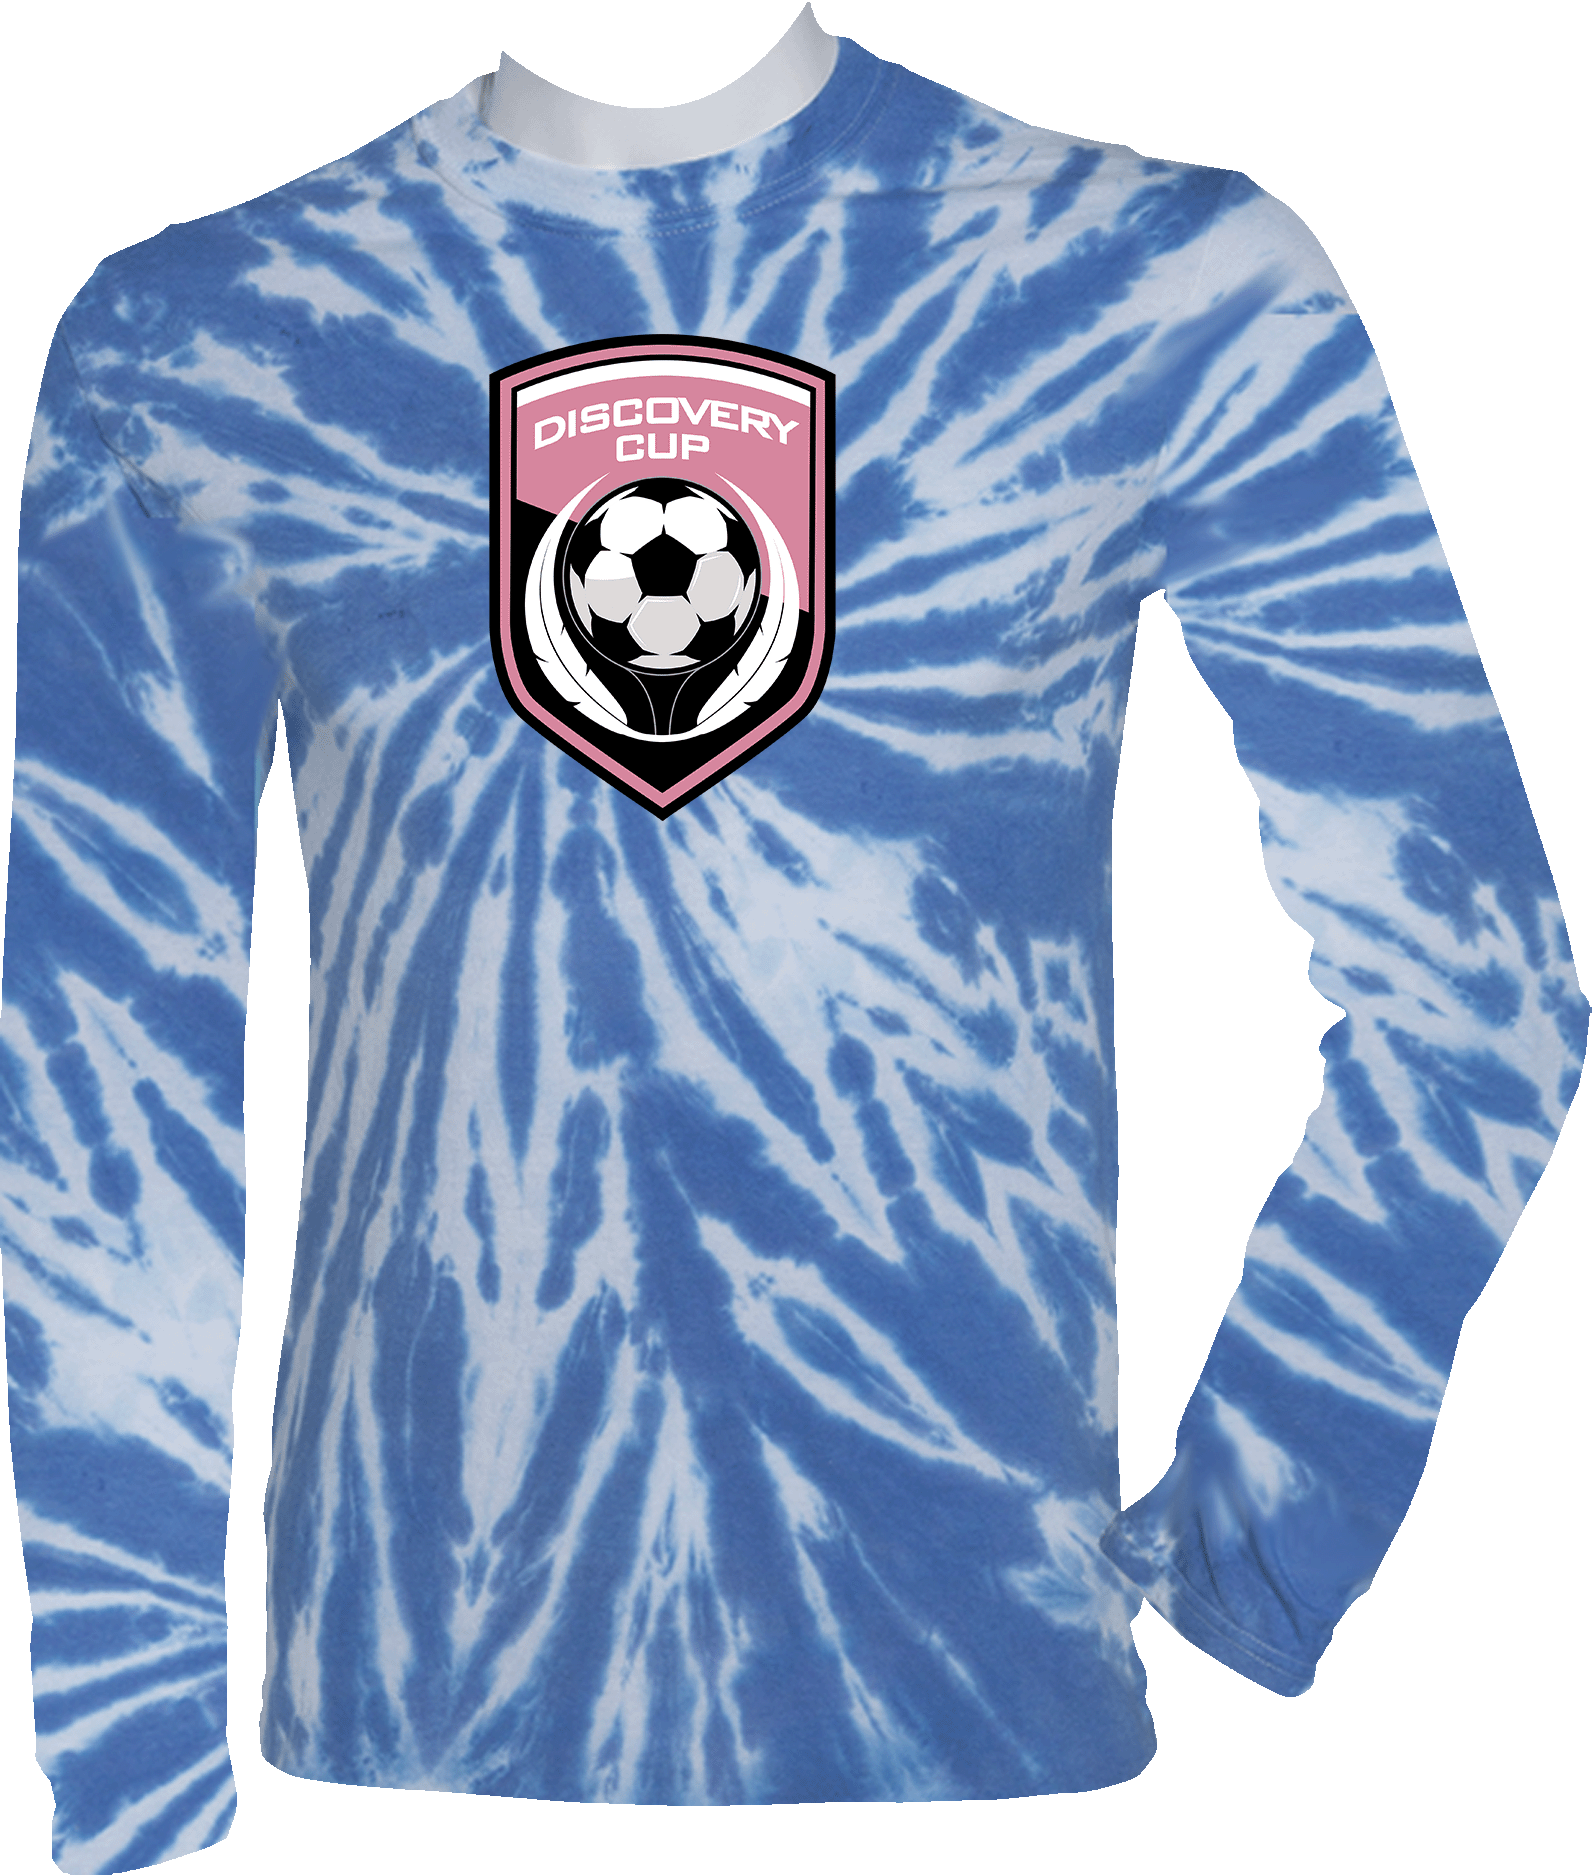 Tie-Dye Long Sleeves - 2023 Discovery Cup